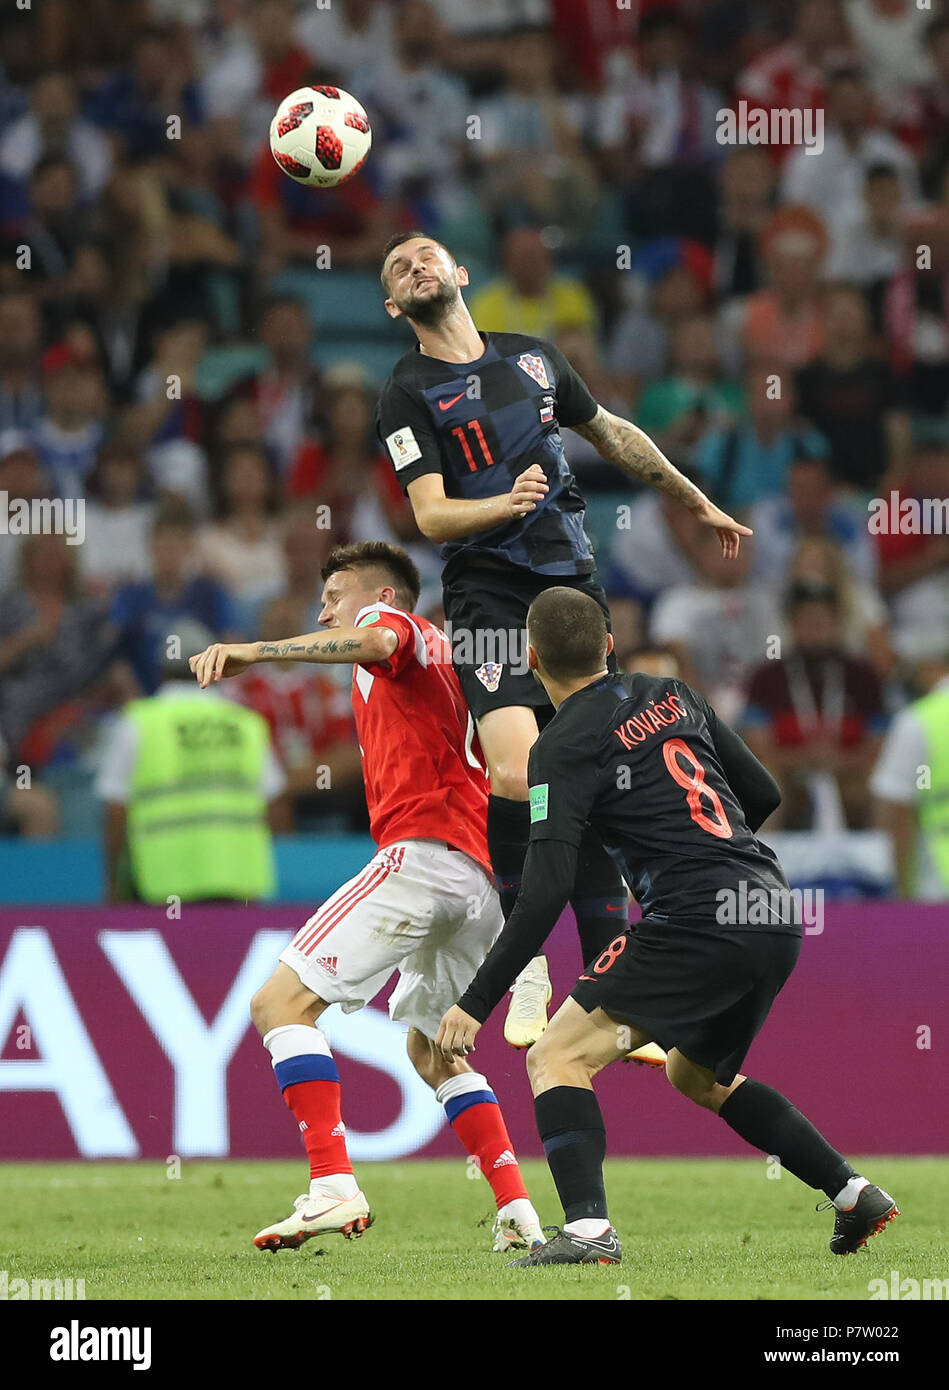 Sochi, Russia. 7th July, 2018. Marcelo Brozovic (top) of Croatia competes for a header during the 2018 FIFA World Cup quarter-final match between Russia and Croatia in Sochi, Russia, July 7, 2018. Credit: Xu Zijian/Xinhua/Alamy Live News Stock Photo